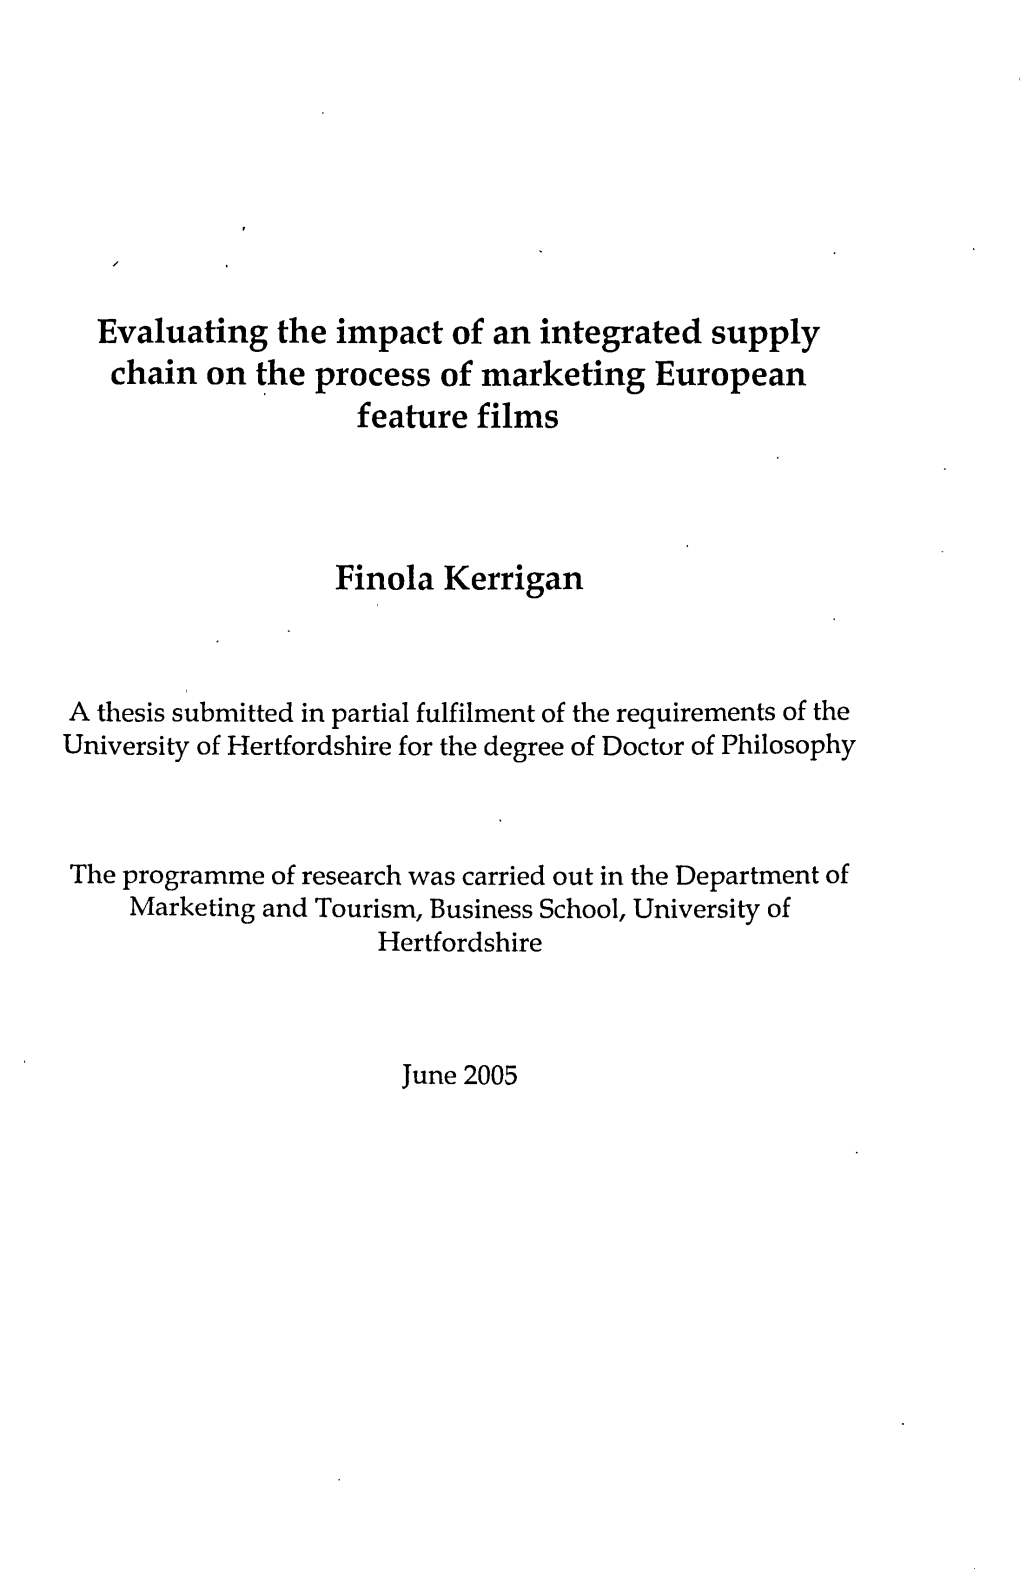 A Thesis Submitted in Partial Fulfilment of the Requirements of the University of Hertfordshire for the Degree of Doctor of Philosophy